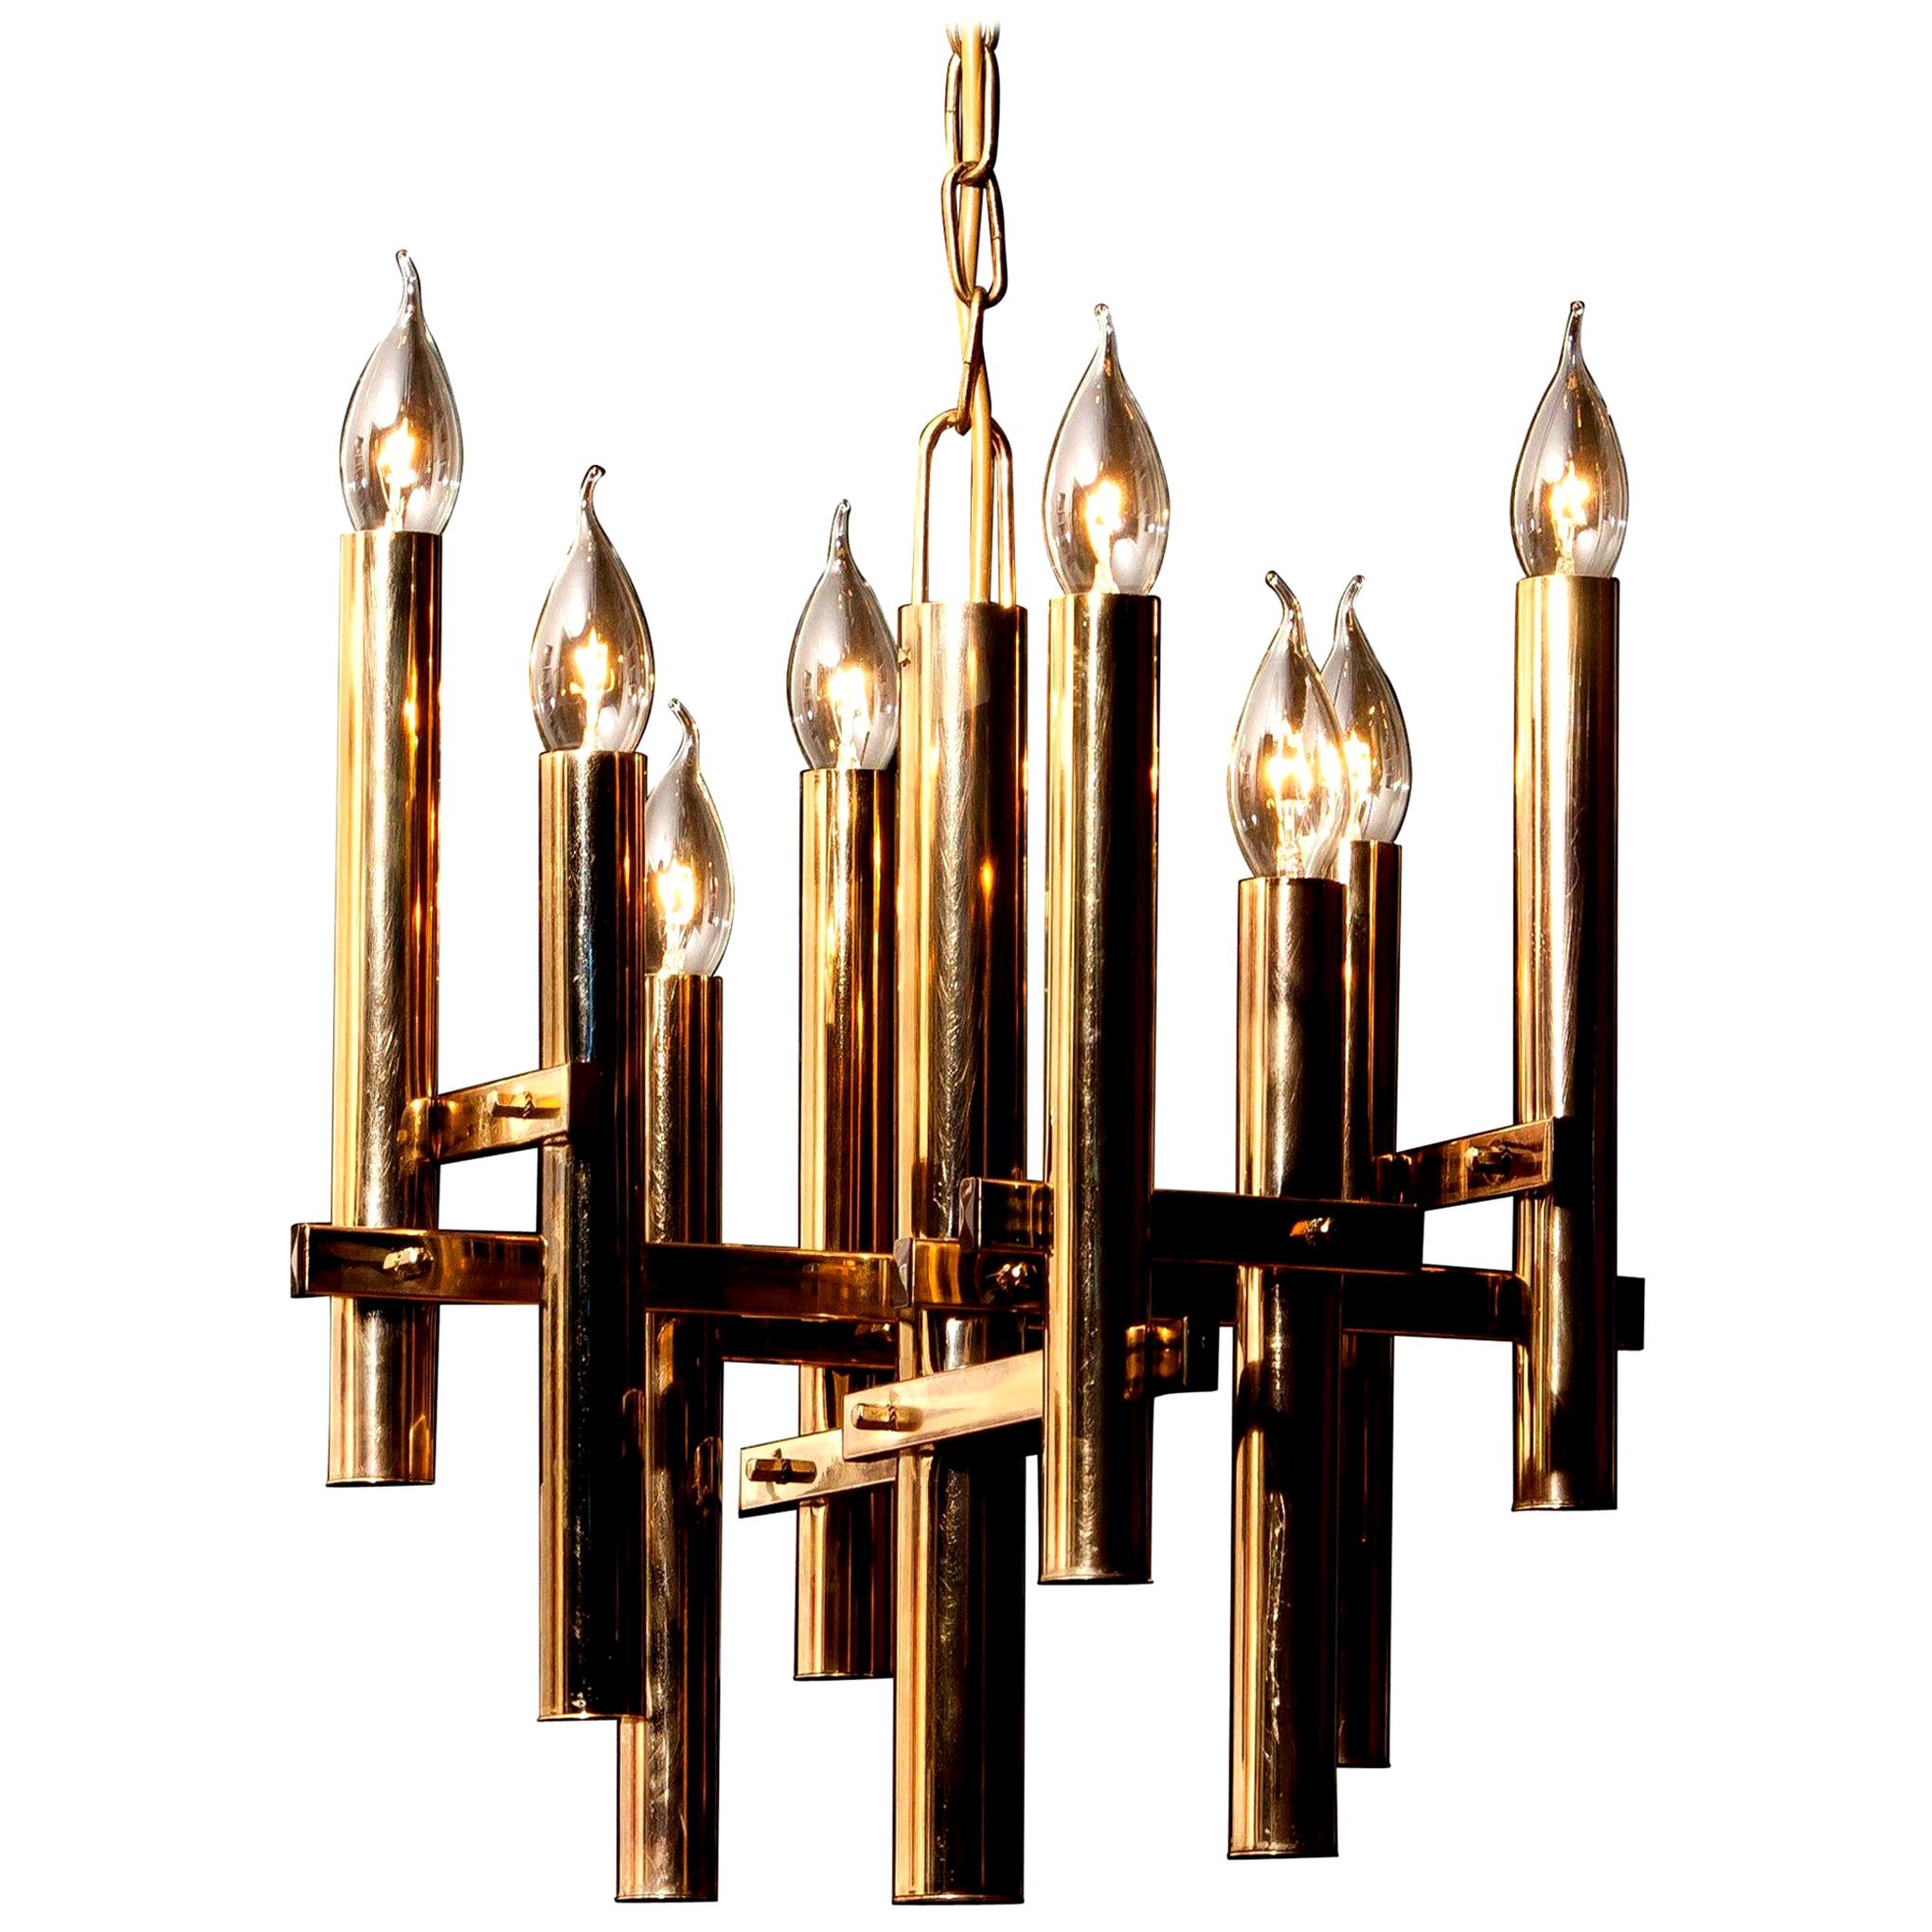 Beautiful brass pendant by Gaetano Sciolari, Italy.
This wonderful lamp has eight fittings.
The height is adjustable.
It is in excellent condition.
Period: 1960s.
Dimensions: H 93 cm, ø 40 cm.